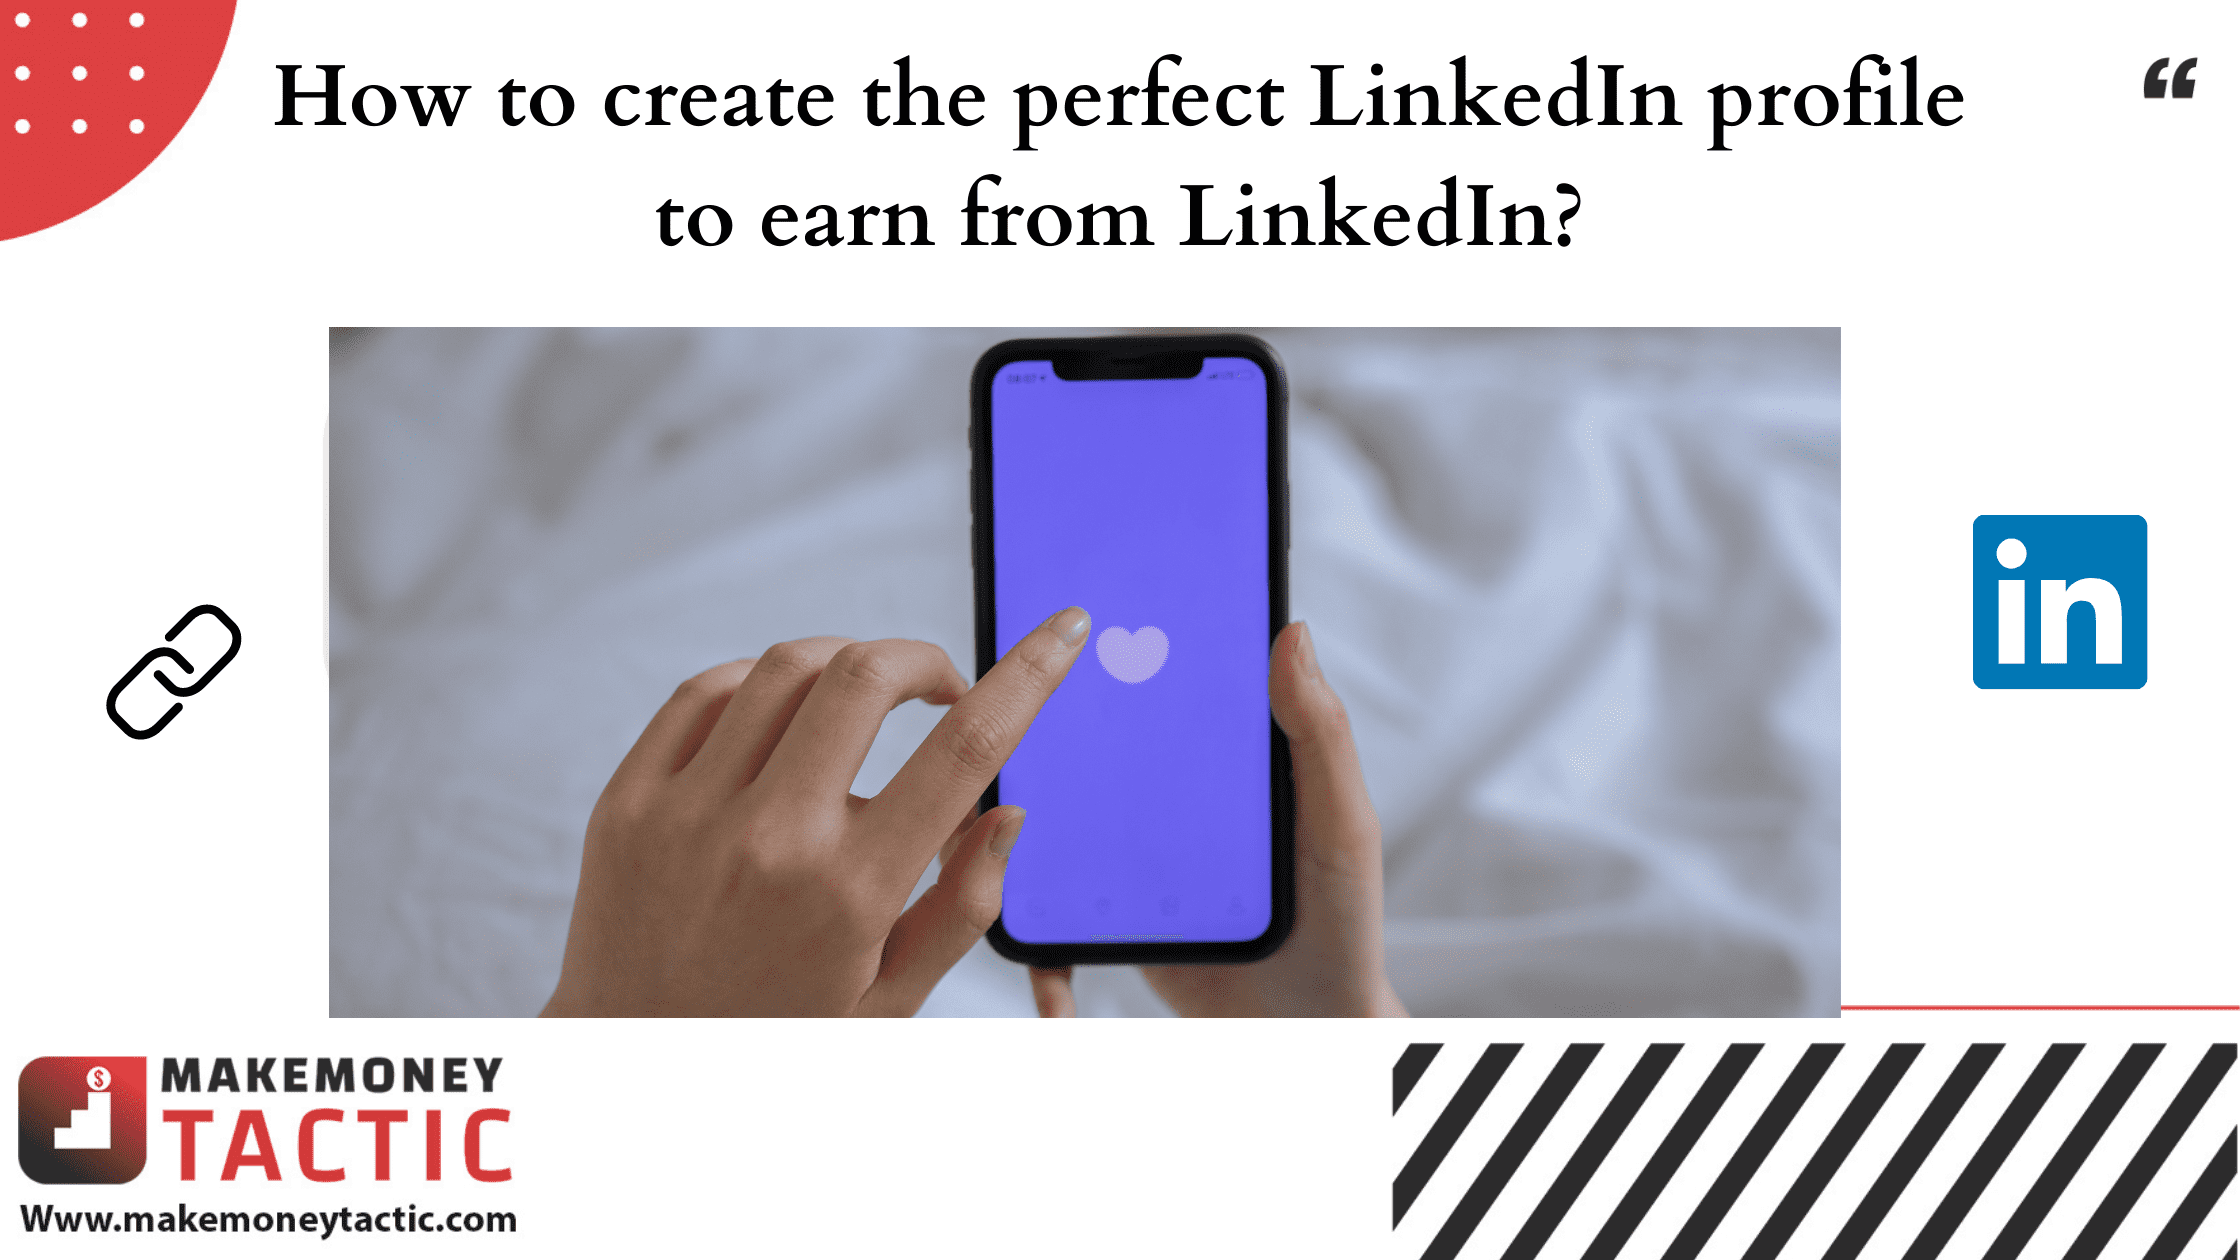 How to create the perfect LinkedIn profile to earn from LinkedIn?